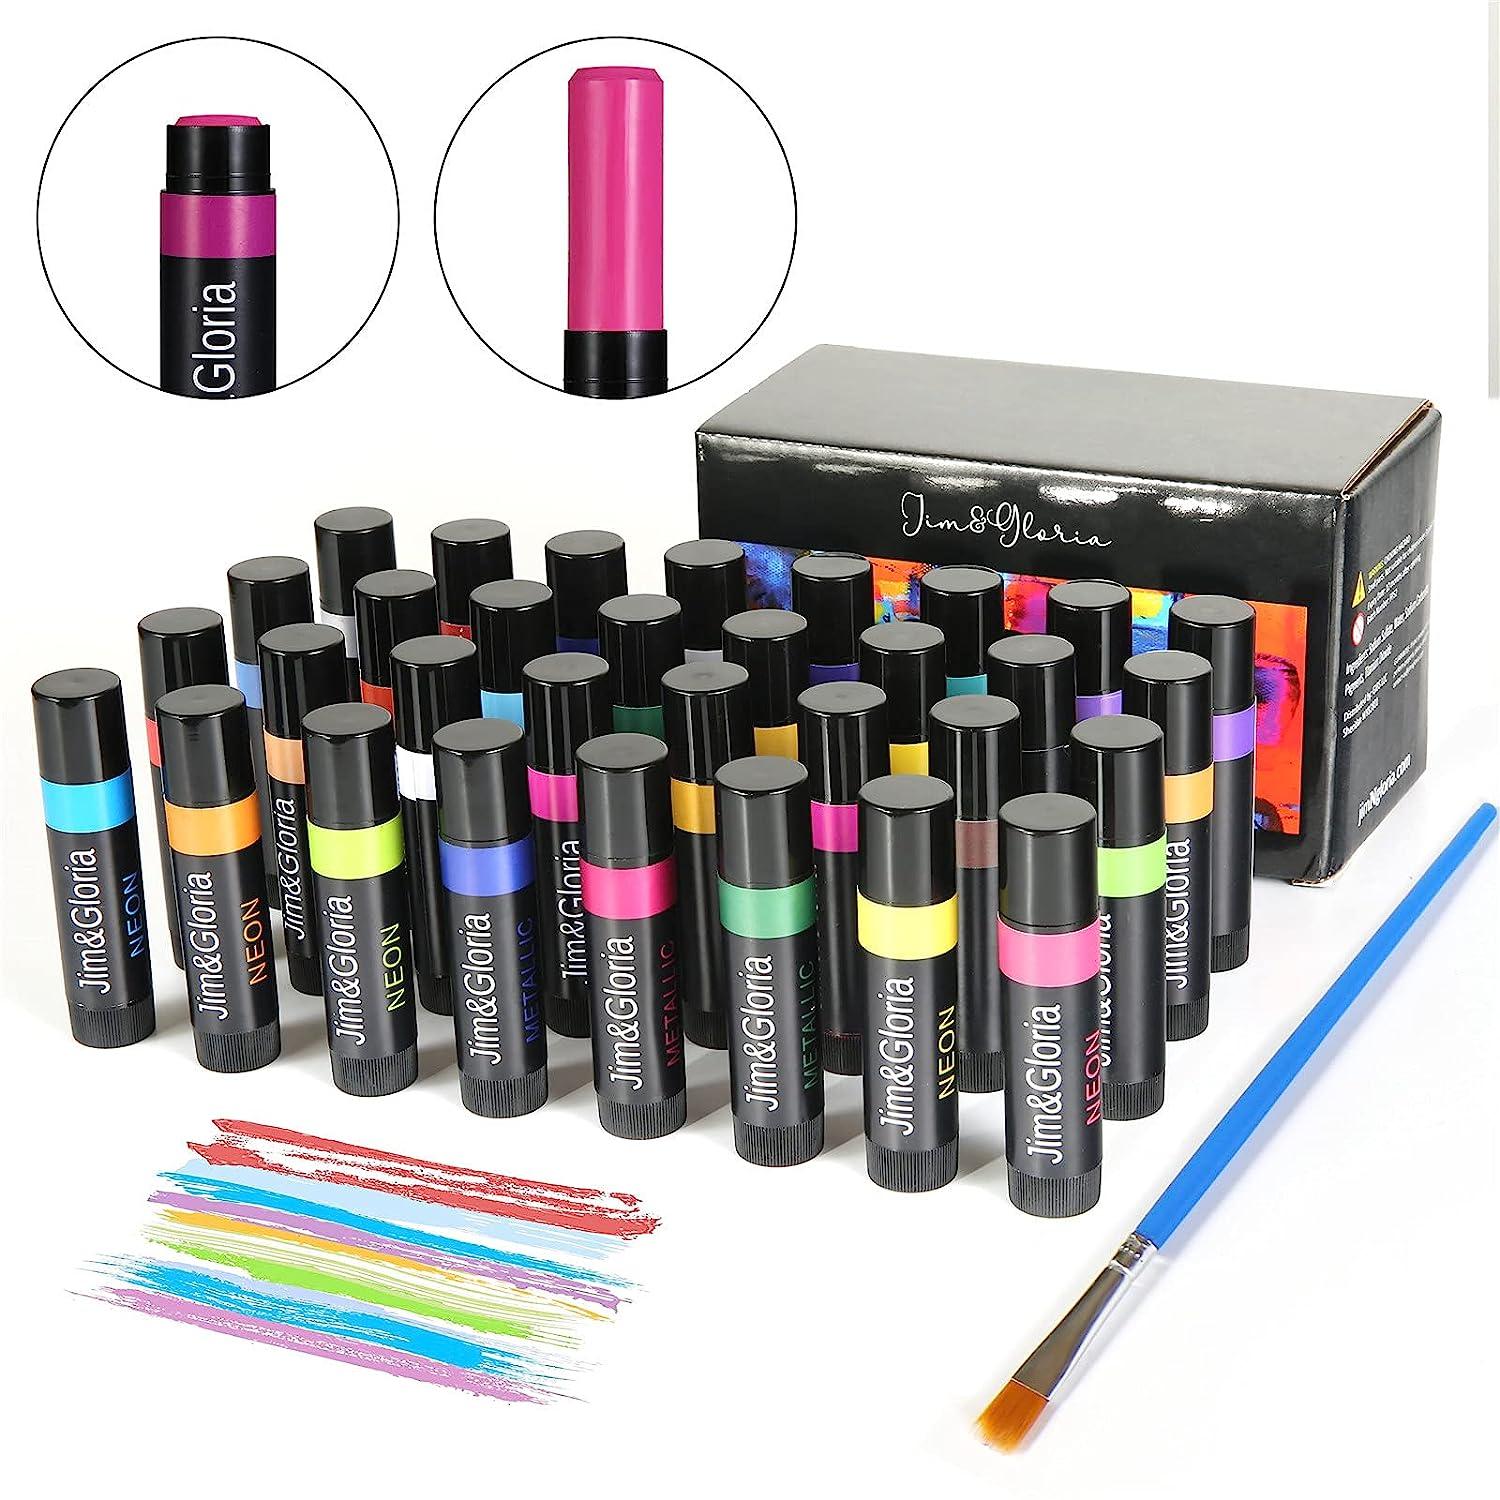 A set of 12 special markers for body art and face painting